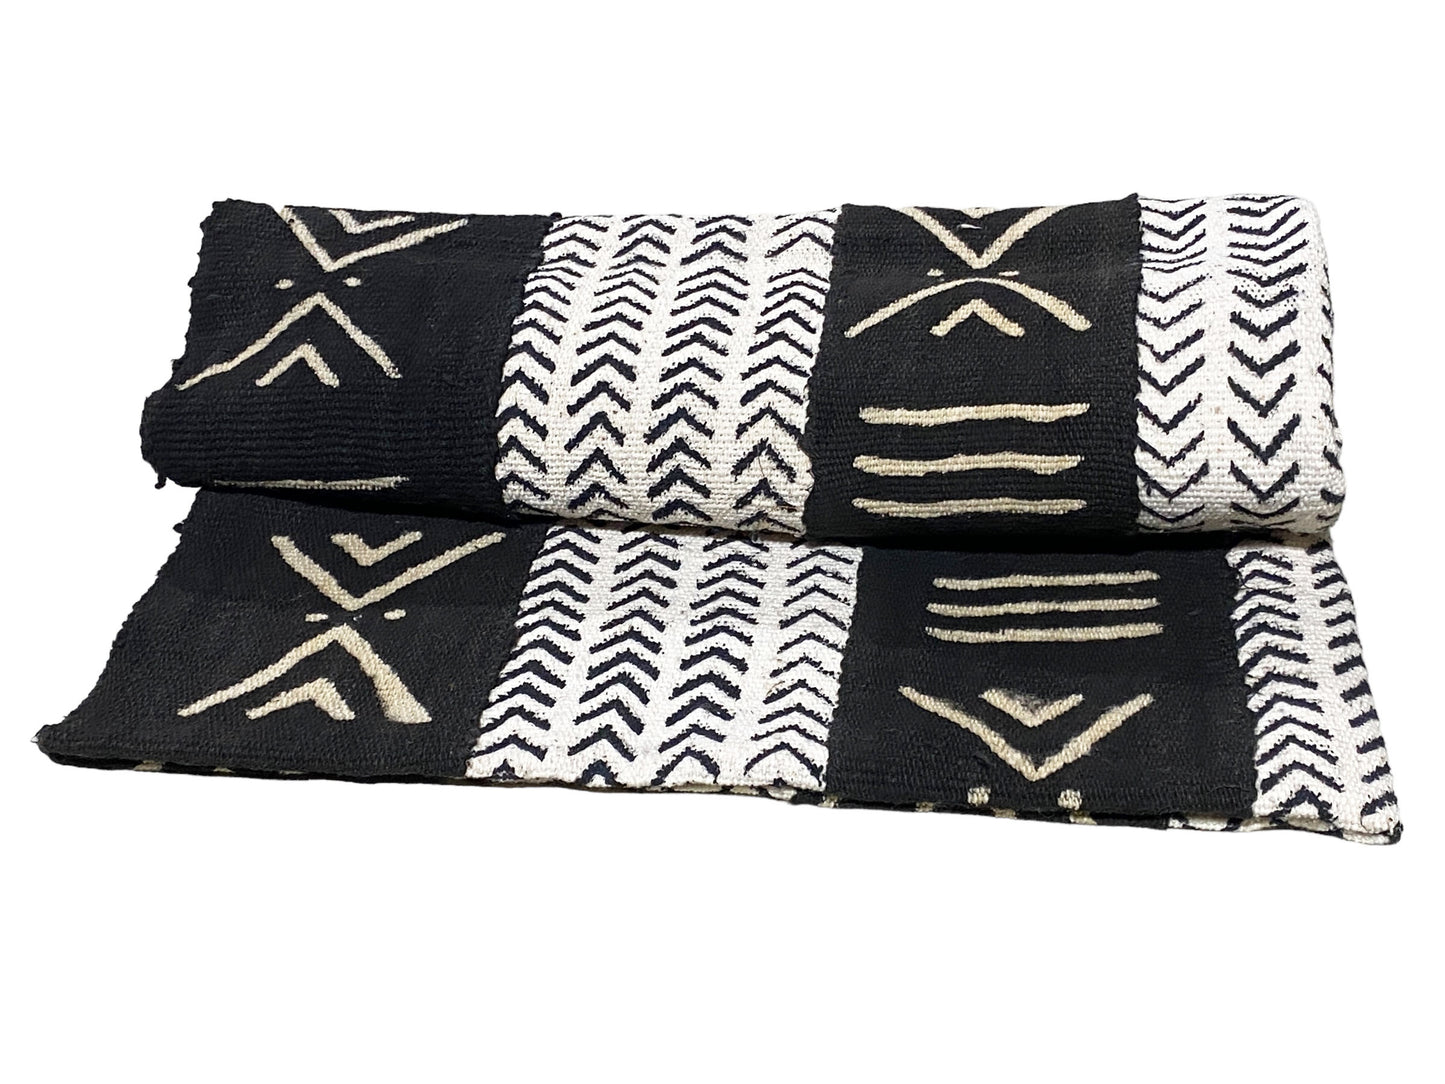 # 5729 African Black and White Mud Cloth Textile Mali 62" by 36"